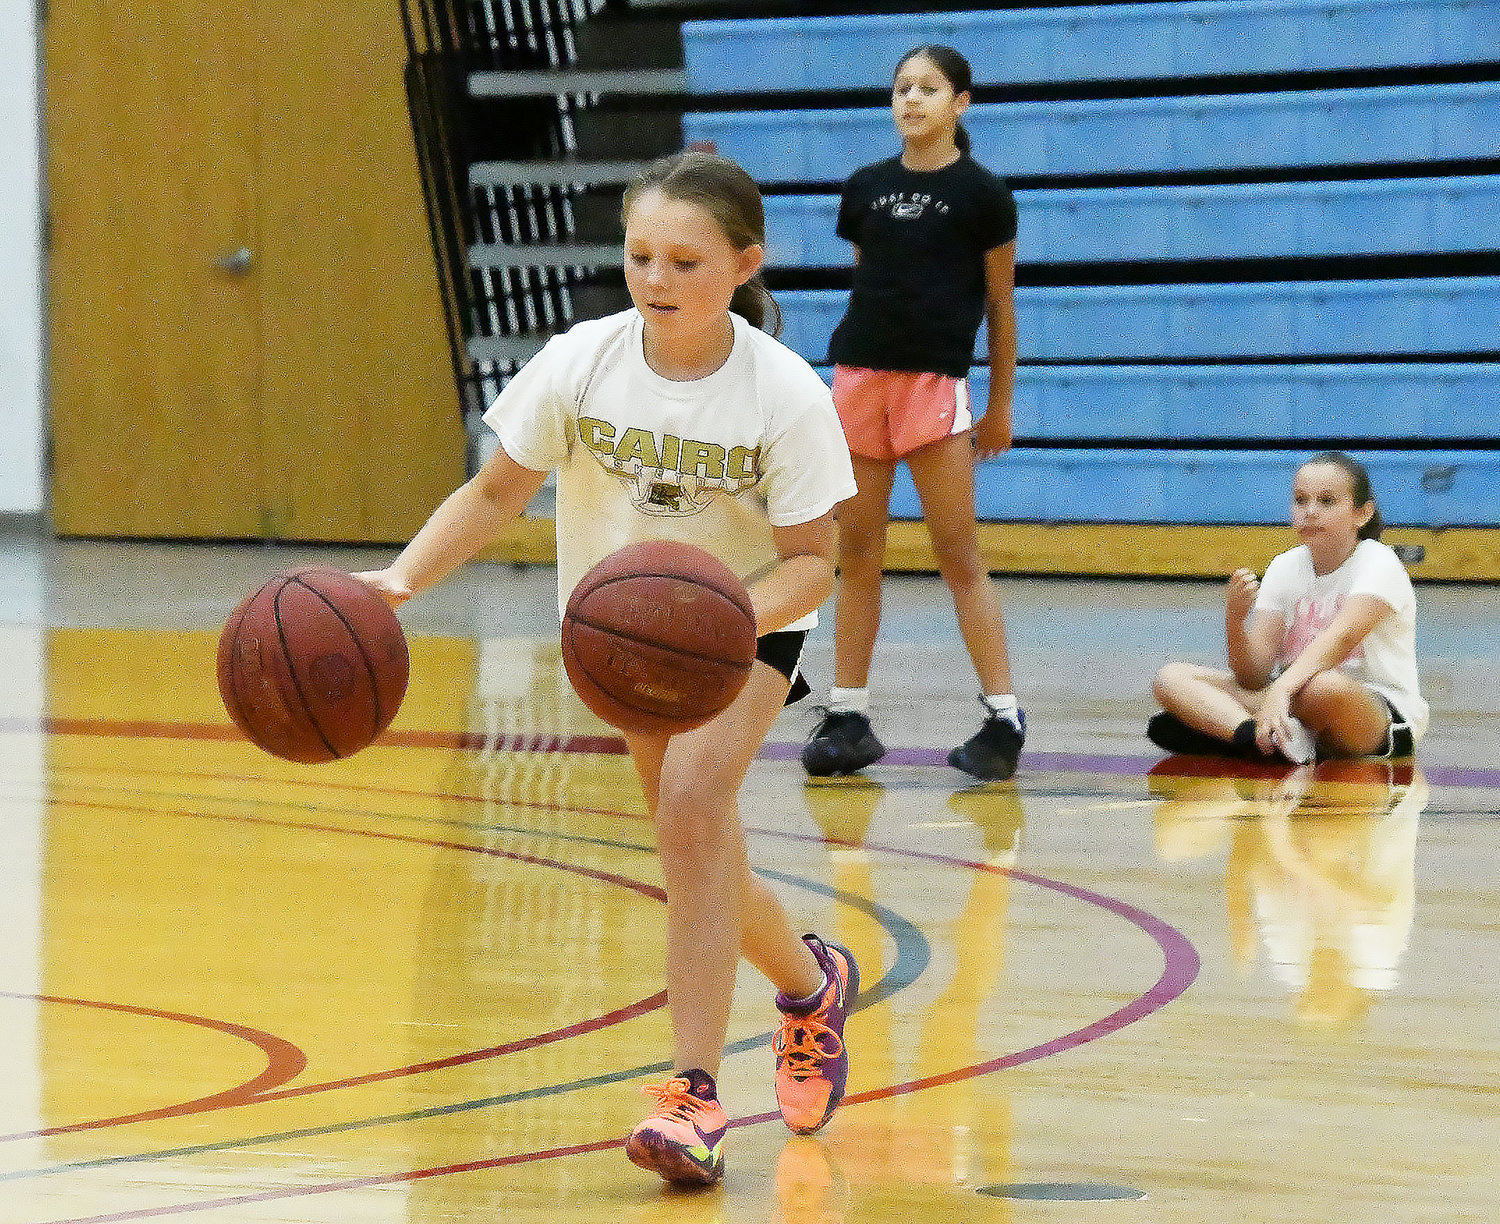 Mazy Jaecques dribbles two basketballs at the same time during a drill.